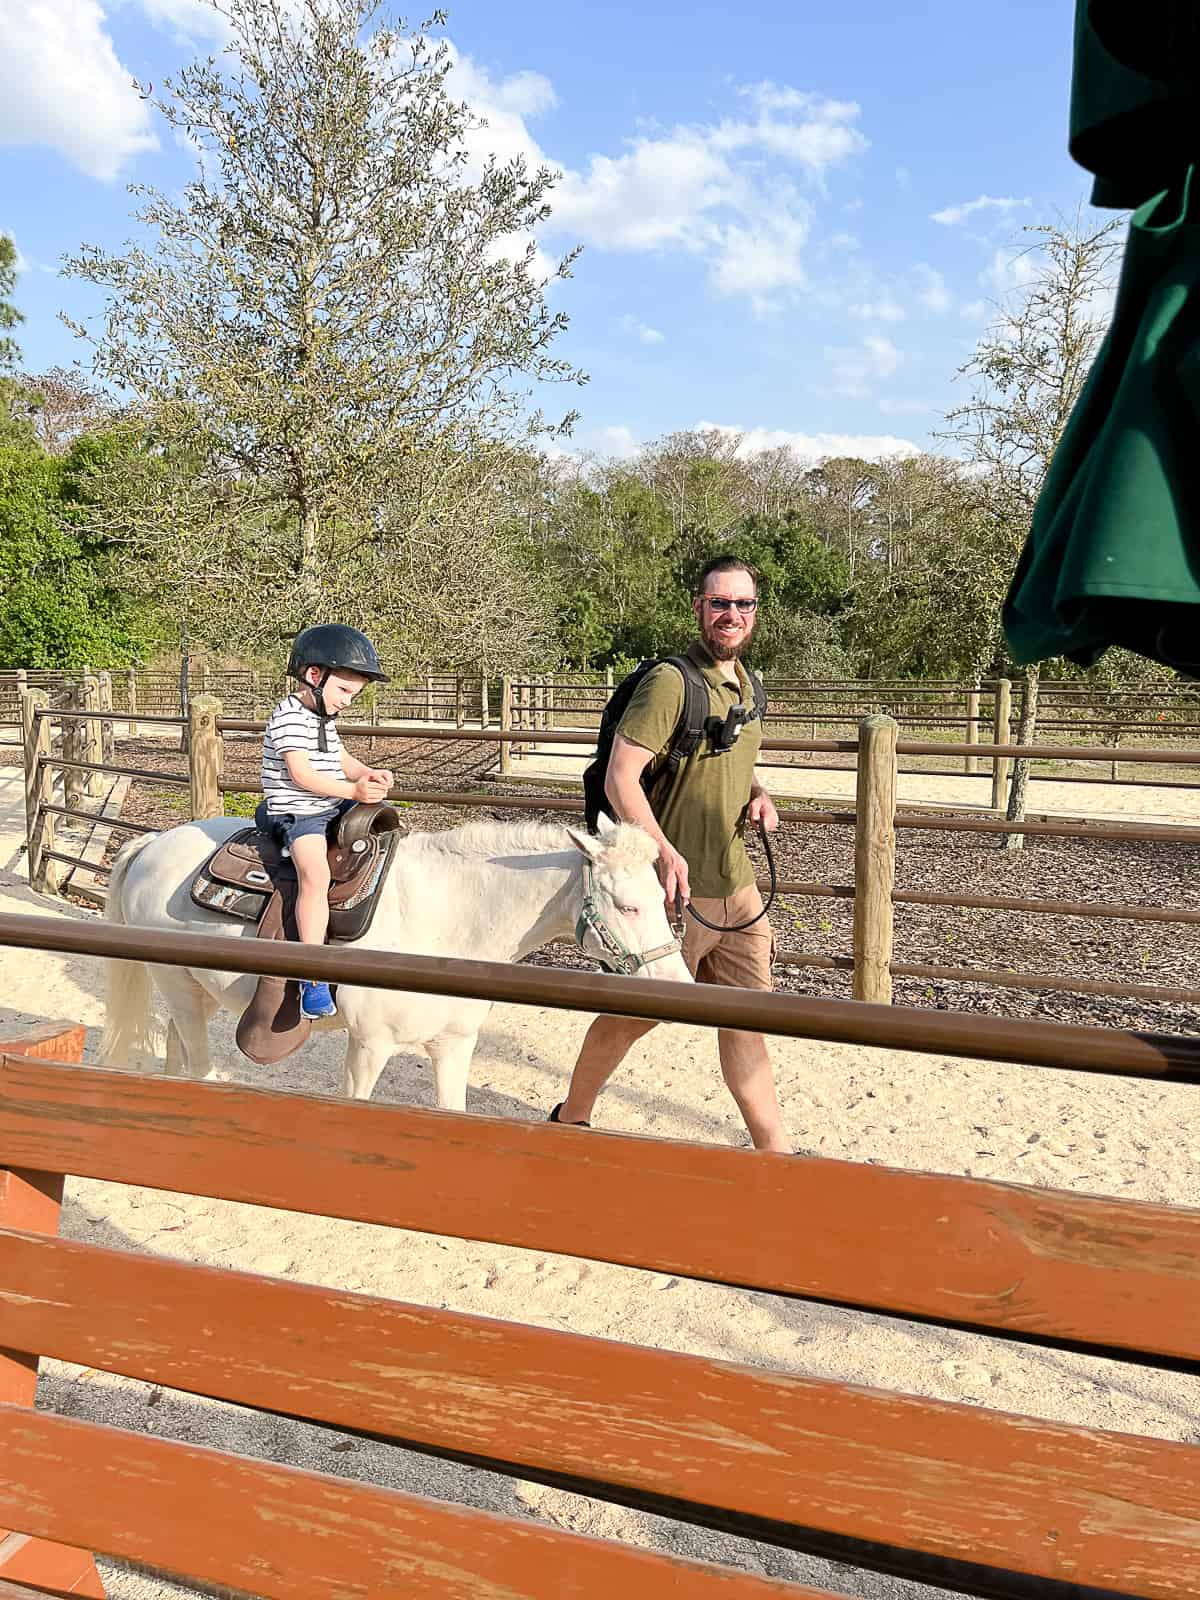 Demonstrating Horseback Riding as one of the Things To Do at Walt Disney World Fort Wilderness Lodge without a park ticket